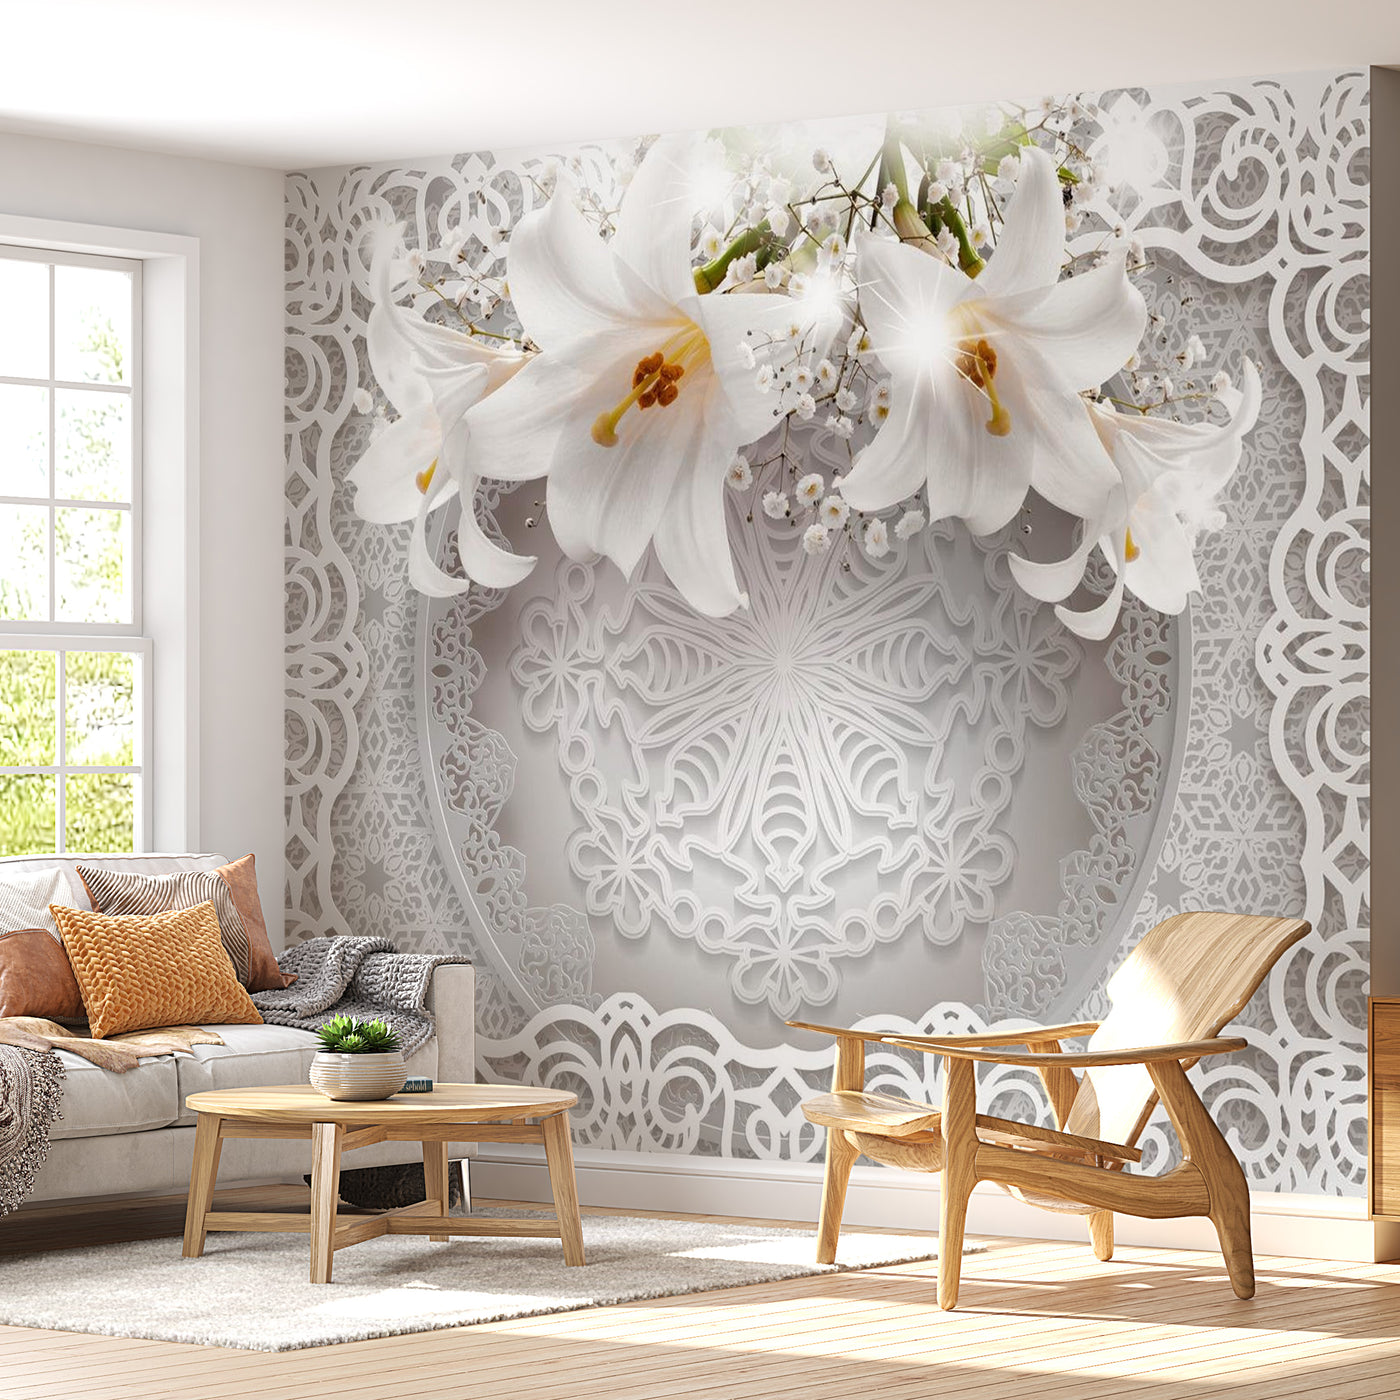 Peel & Stick Floral Wall Mural - Lilies And Ornaments - Removable Wall Decals